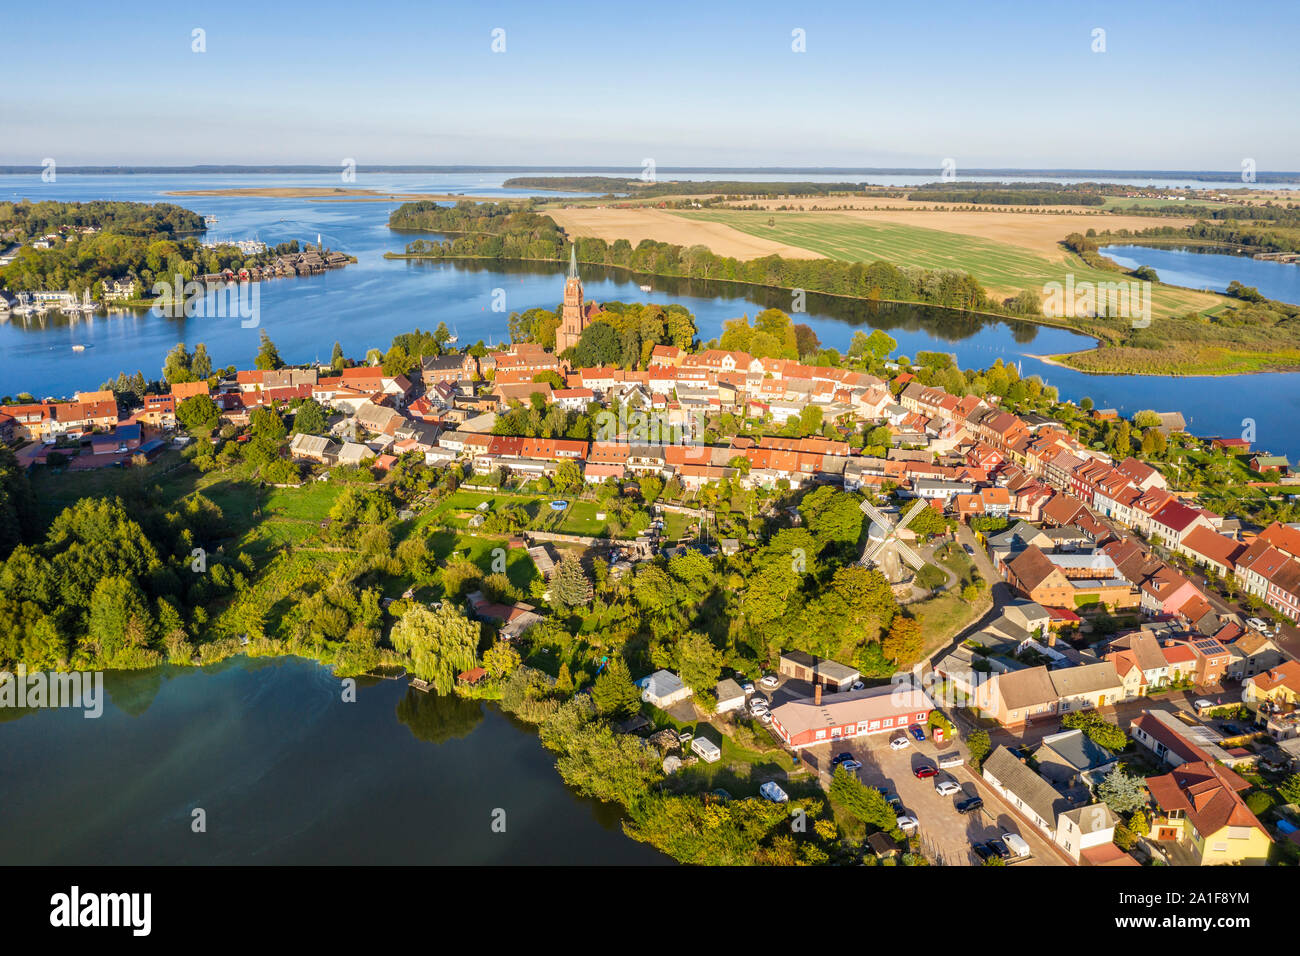 Drone shot, aerial view over town of Röbel, lake Mönchteich in front, St. Mary's Church in center,  lake Mueritz,  Mecklenburg-Vorpommern, Germany Stock Photo